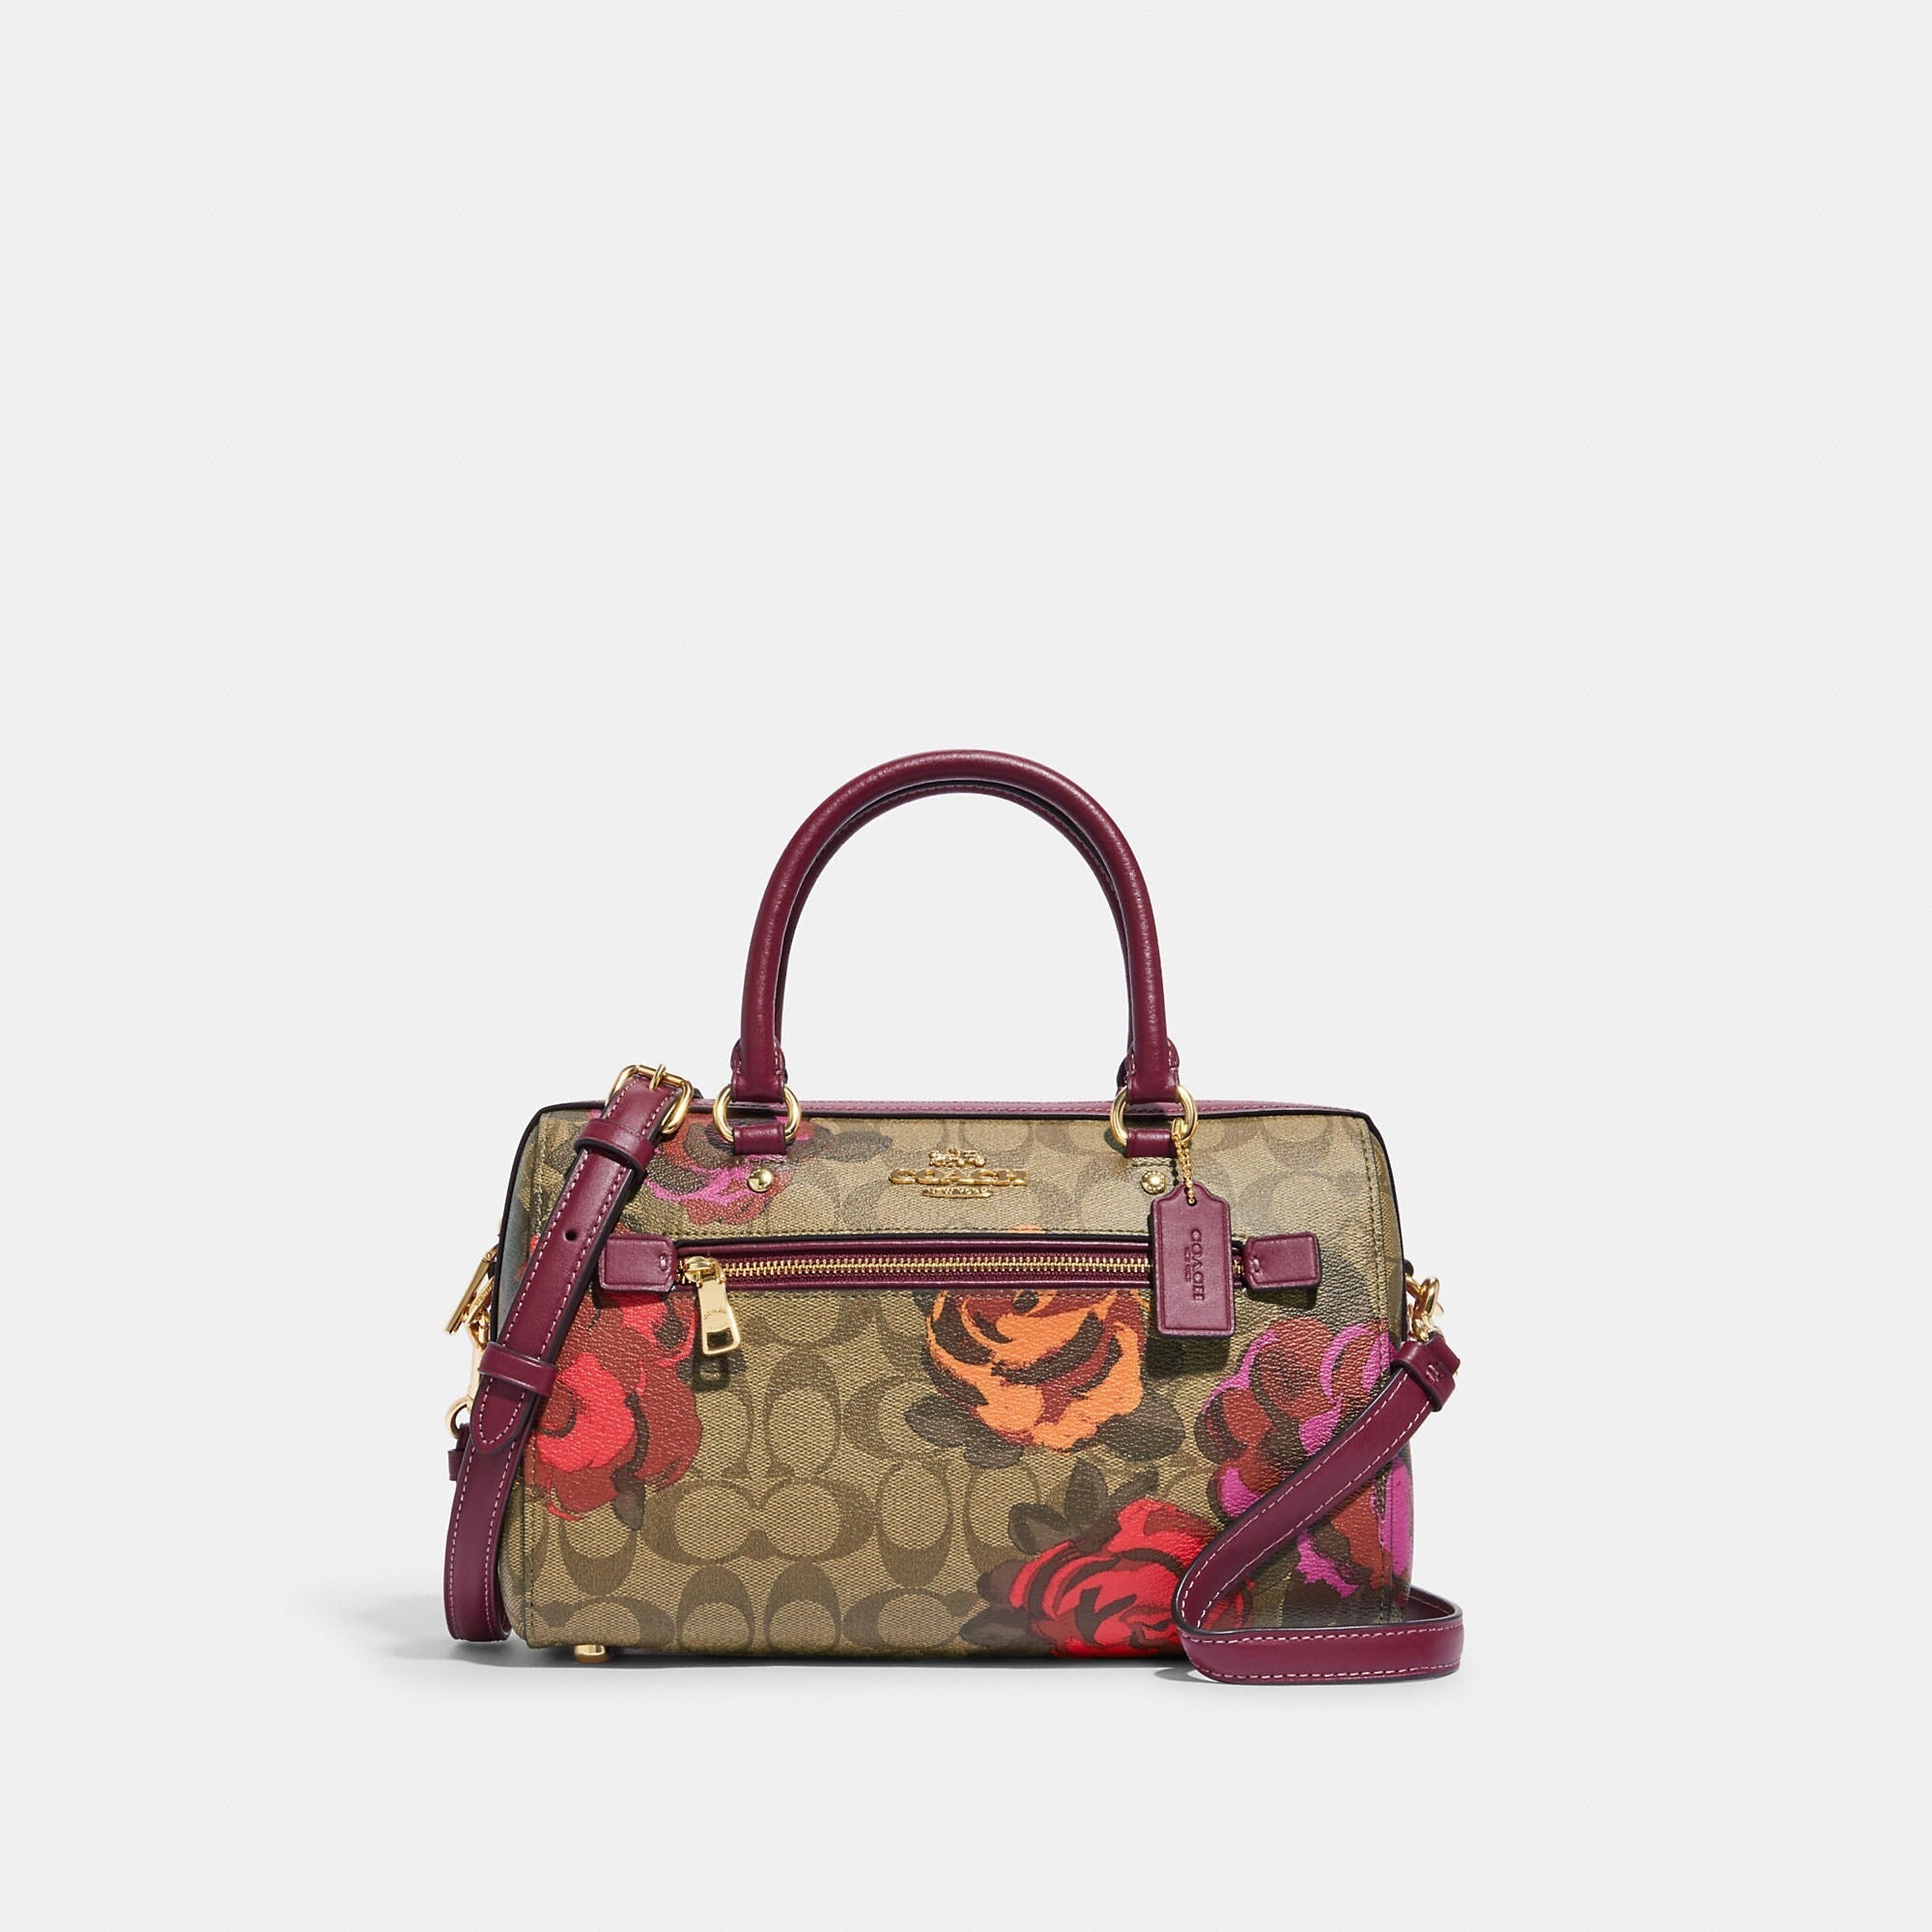 Coach Outlet Rowan Satchel In Signature Canvas With Jumbo Floral Print - TJ Outlet